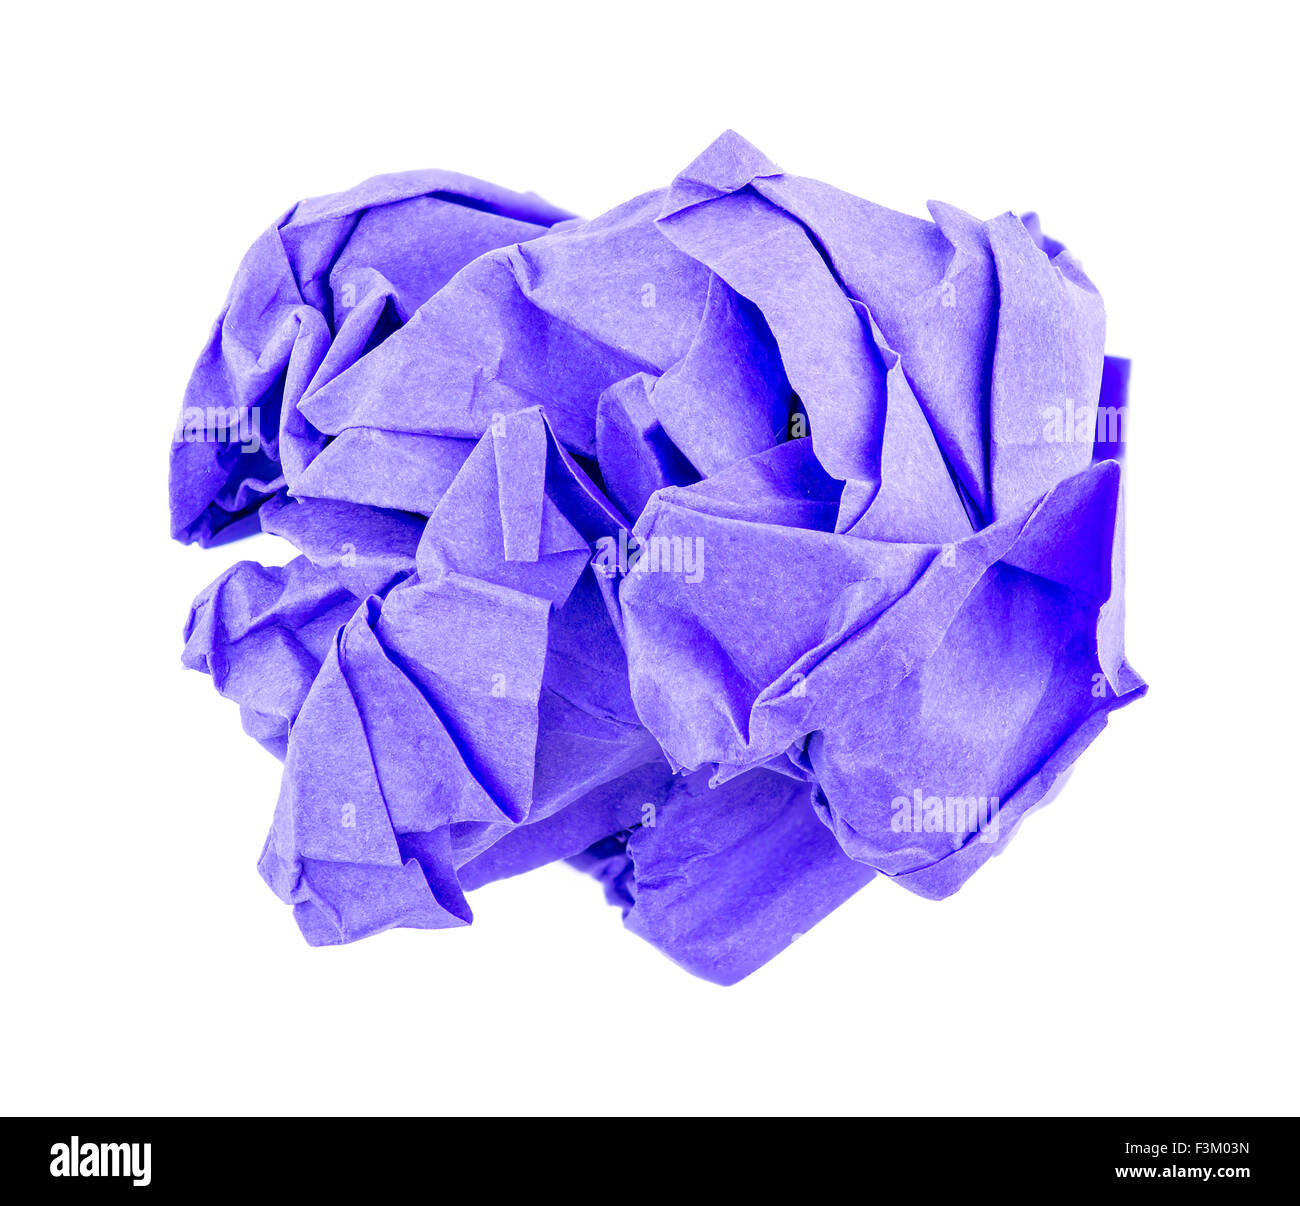 Crumbled ball of purple recycled paper Stock Photo